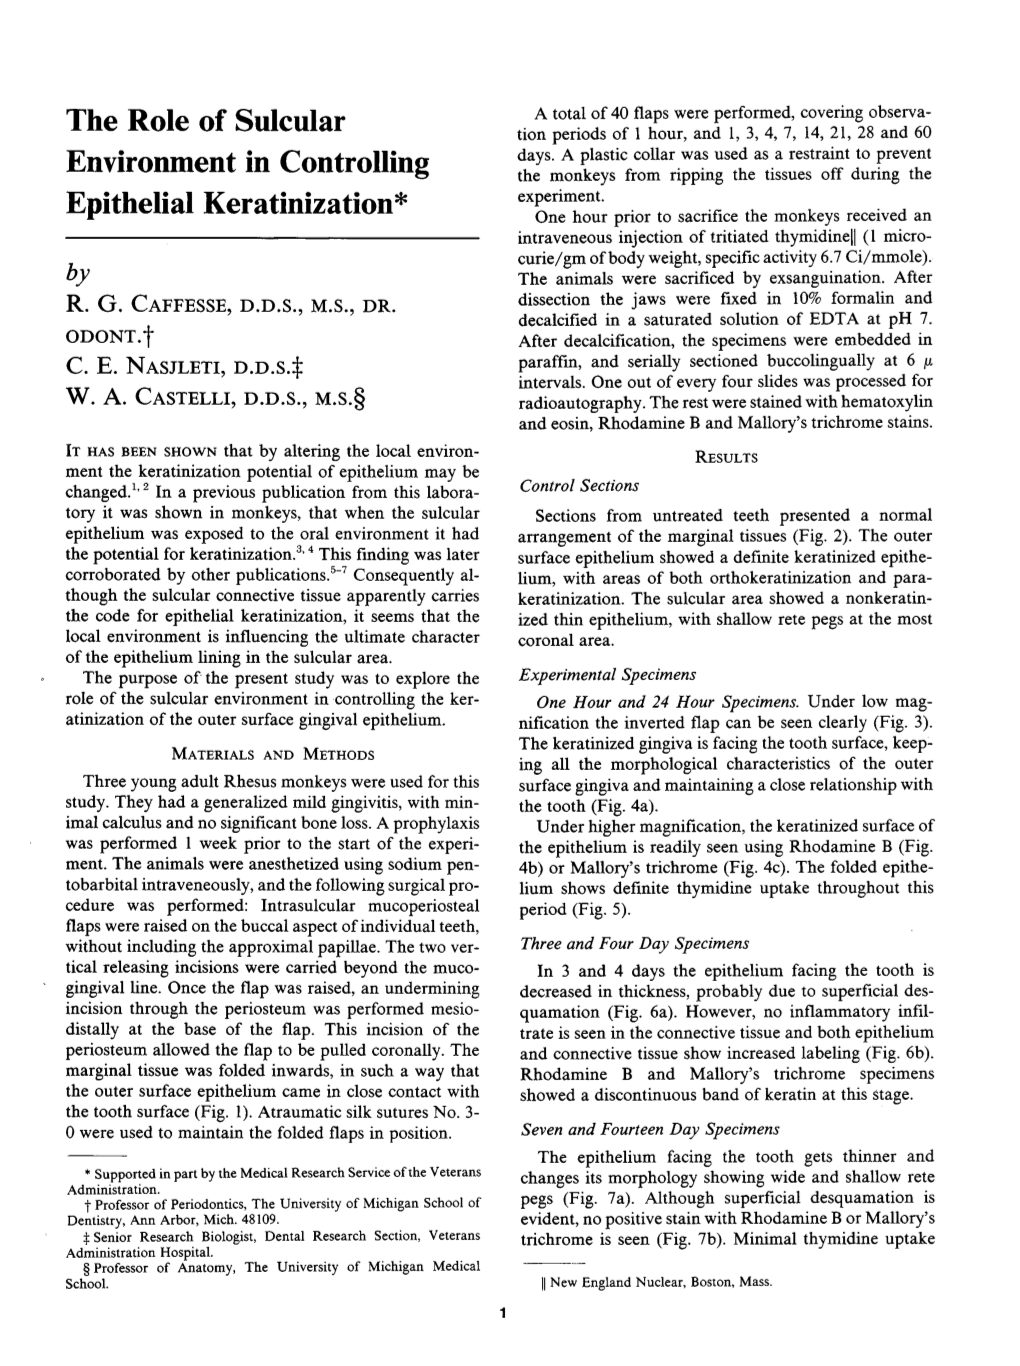 The Role of Sulcular Environment in Controlling Epithelial Keratinization&lt;Link Href="#Aff1"/&gt;